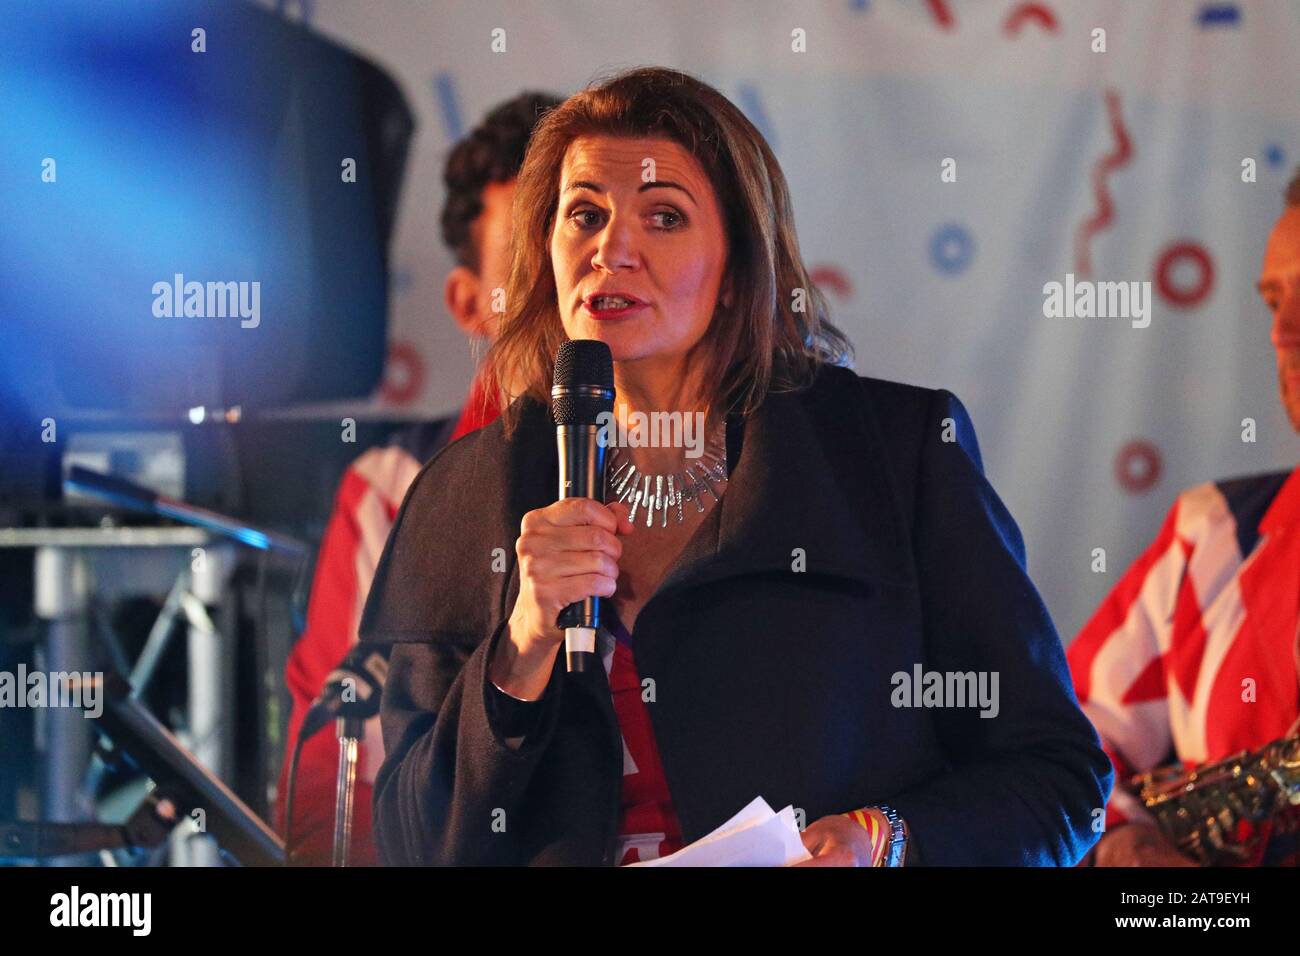 Julia Hartley-Brewer speaks to pro-Brexit supporters in Parliament Square, London, as the UK prepares to leave the European Union, ending 47 years of close and sometimes uncomfortable ties to Brussels. Stock Photo